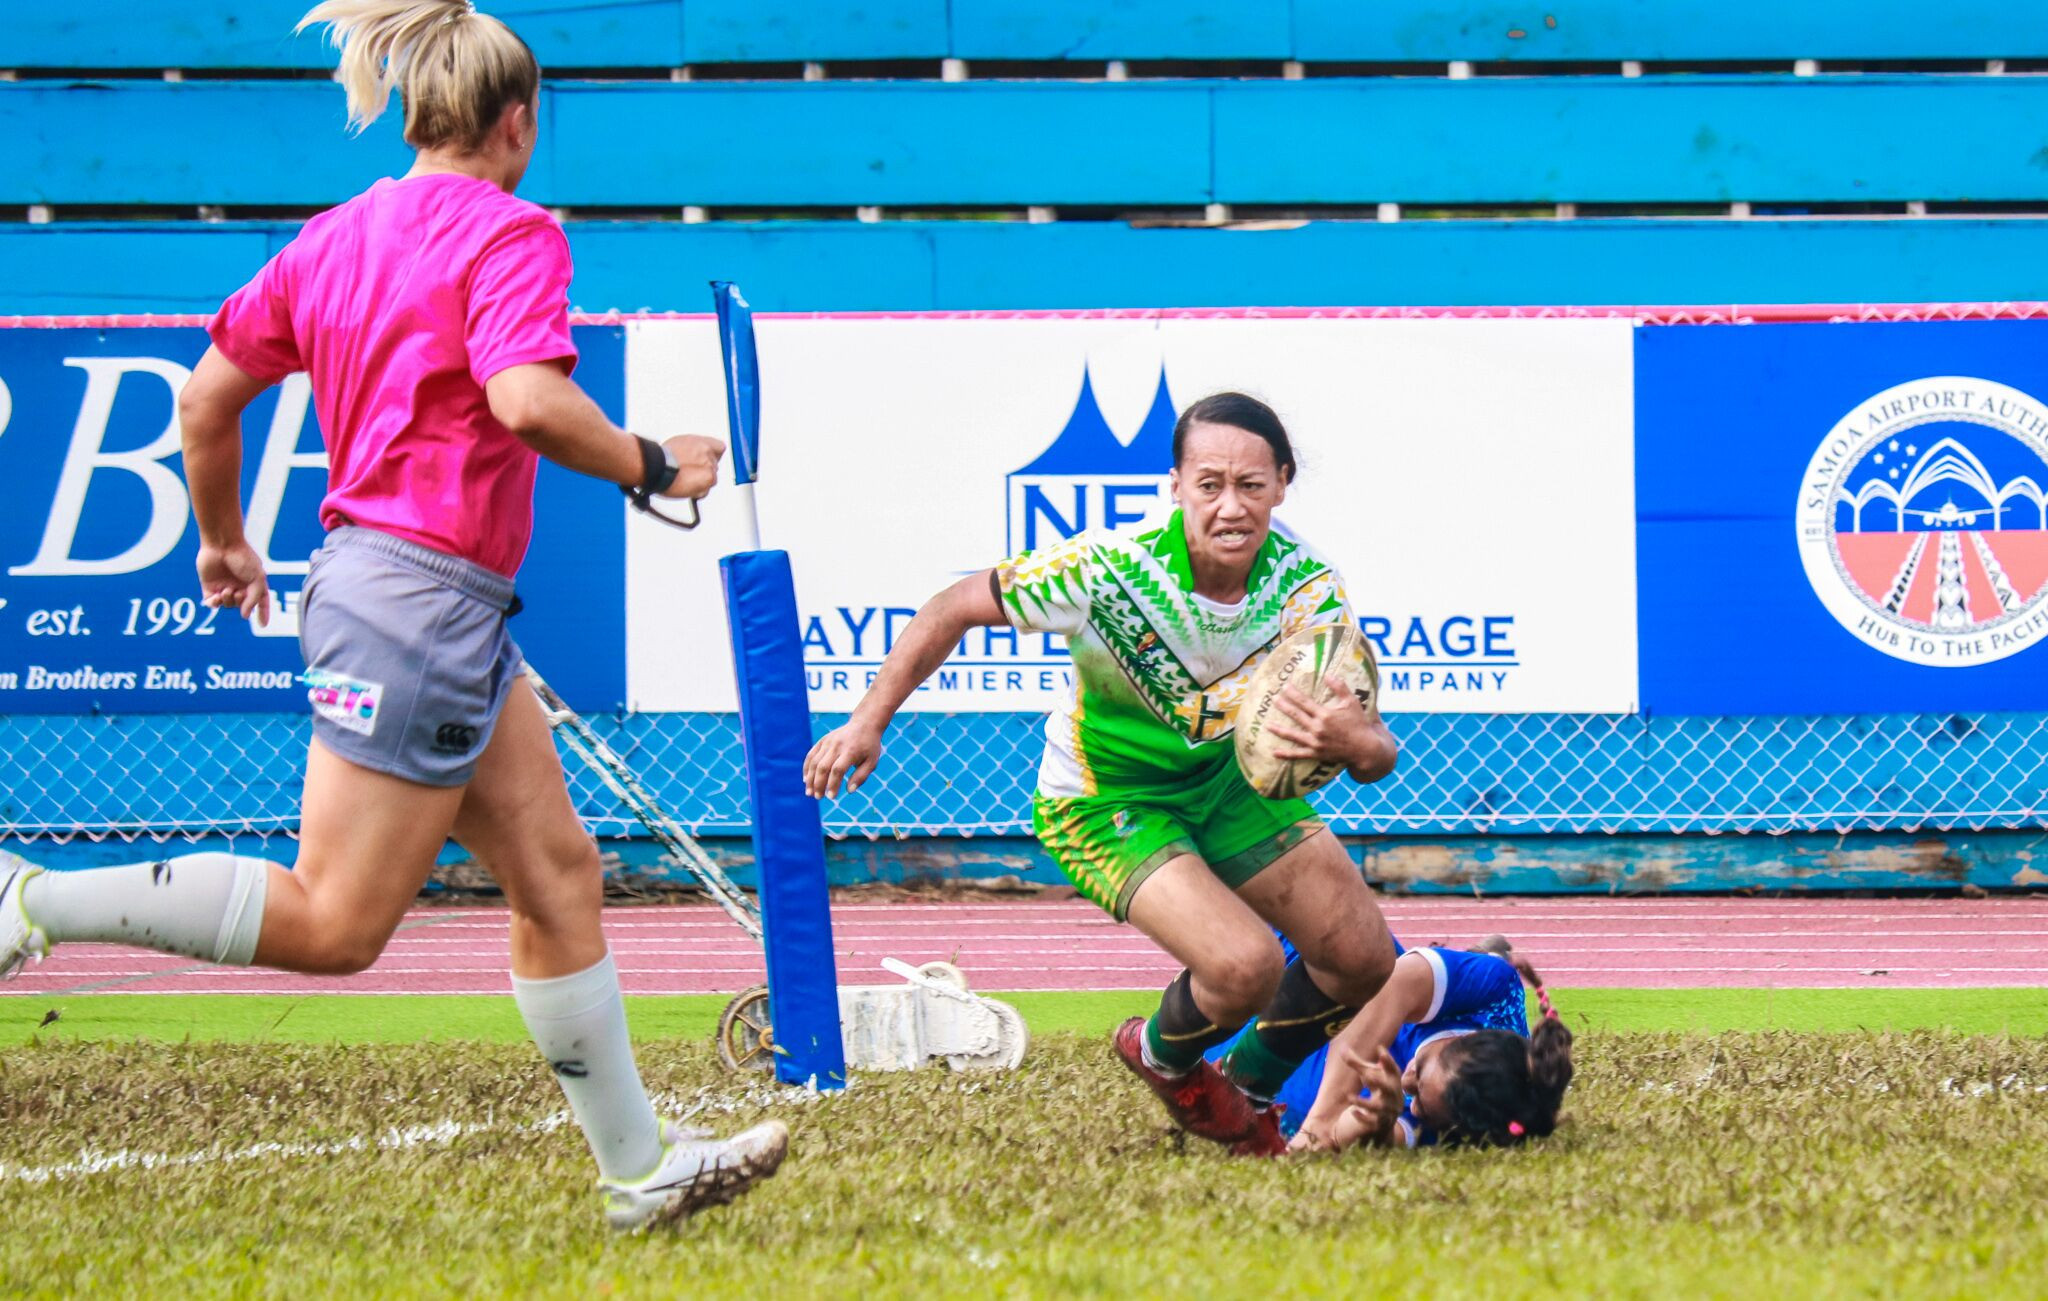 Women's rugby league debuts at Pacific Games as football and cricket see huge wins